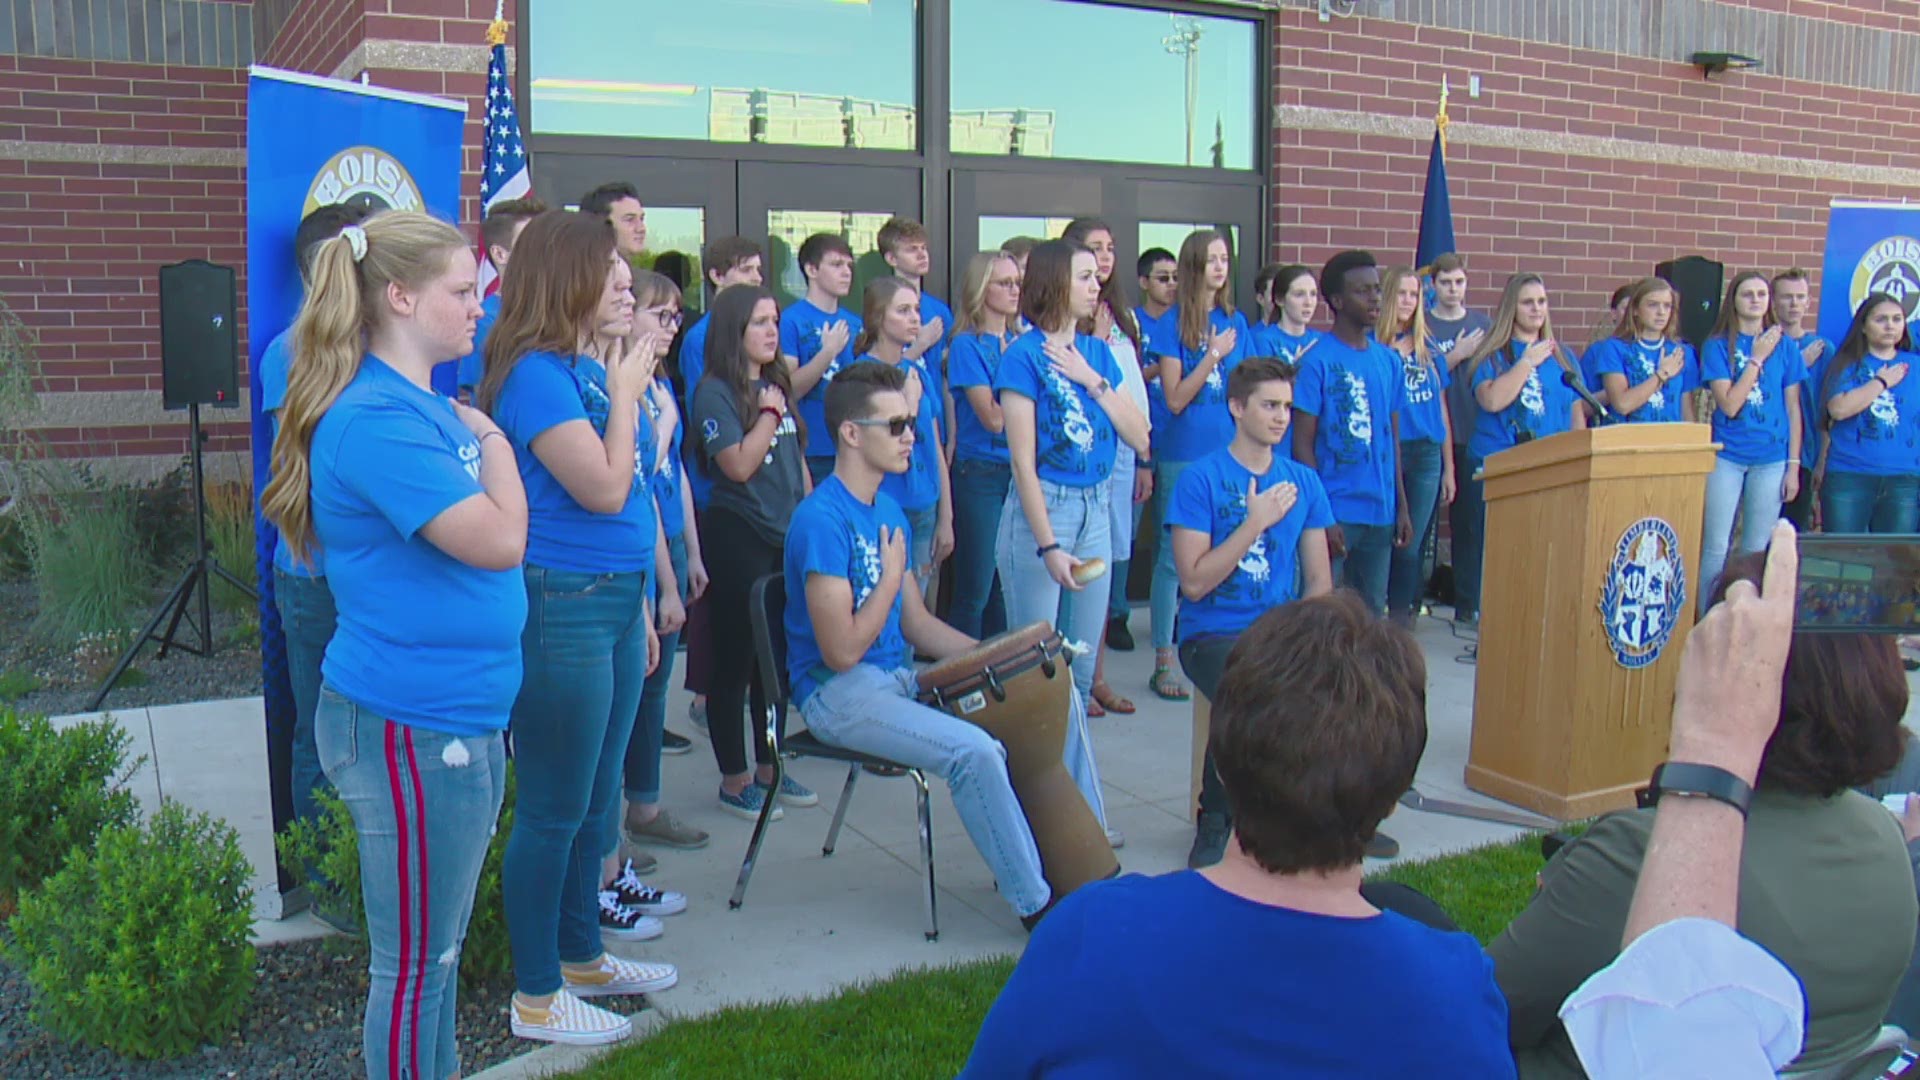 Hear the students perform at Wednesday's dedication ceremony of Timberline's expansion.